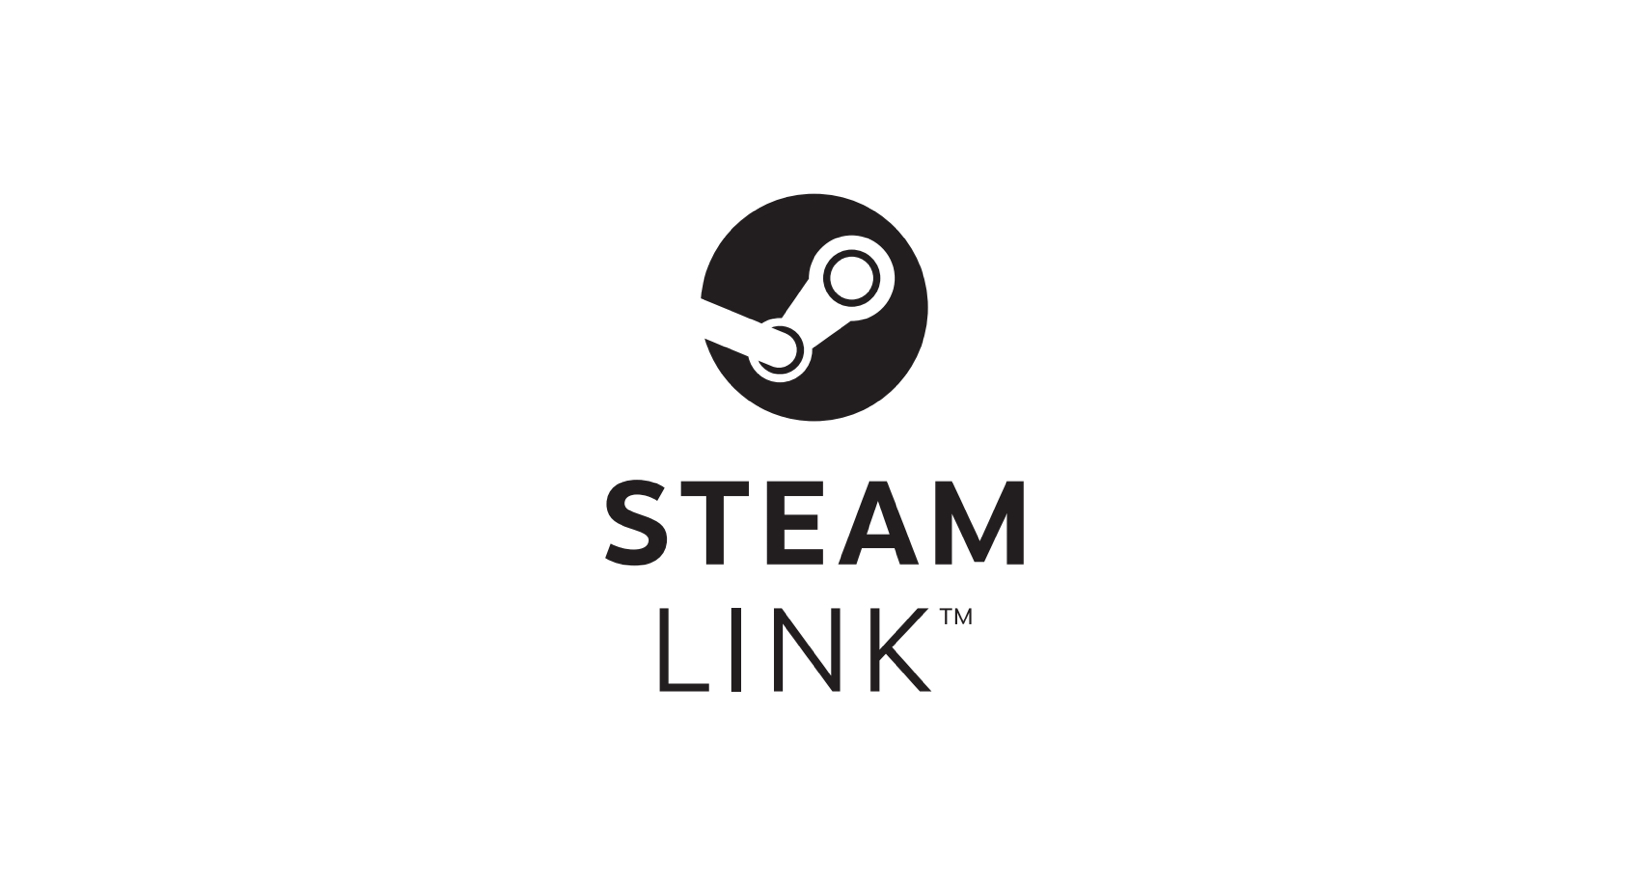 Valve's 'Steam Link' App Finally Makes it to iOS Devices - MacTrast